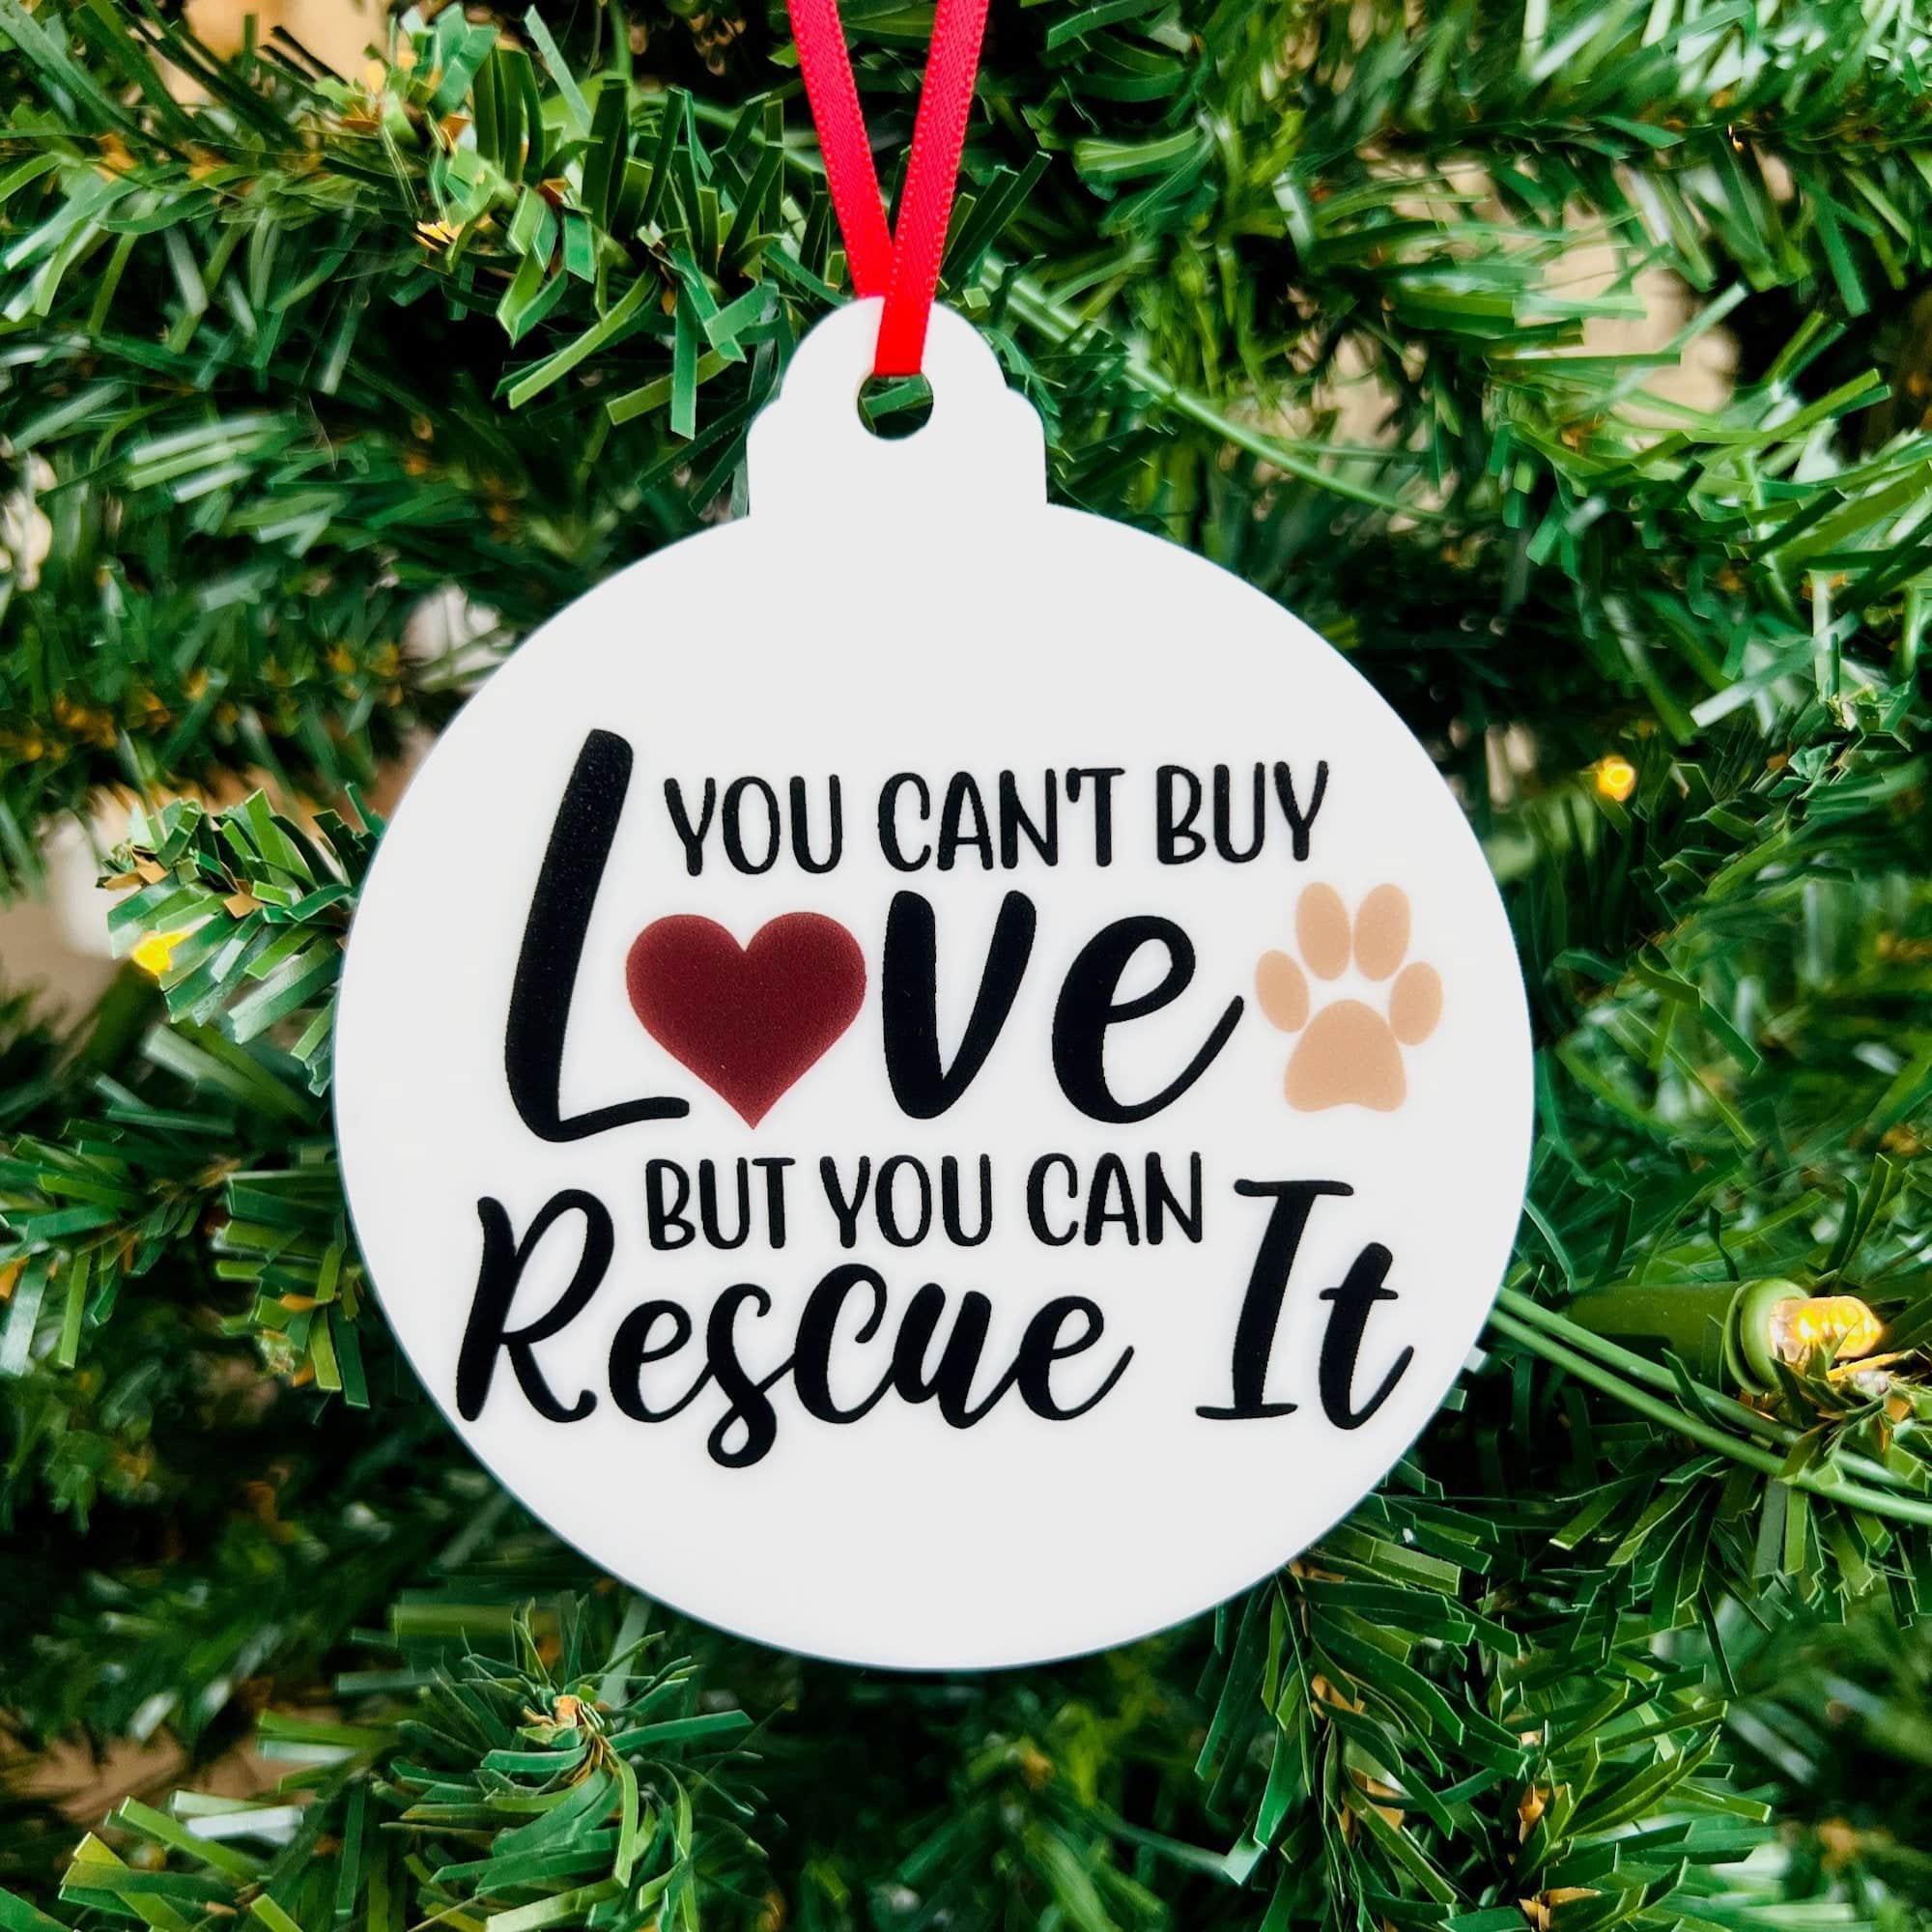 You Can't Buy Love But You Can Rescue It Ornament - Sticks & Doodles